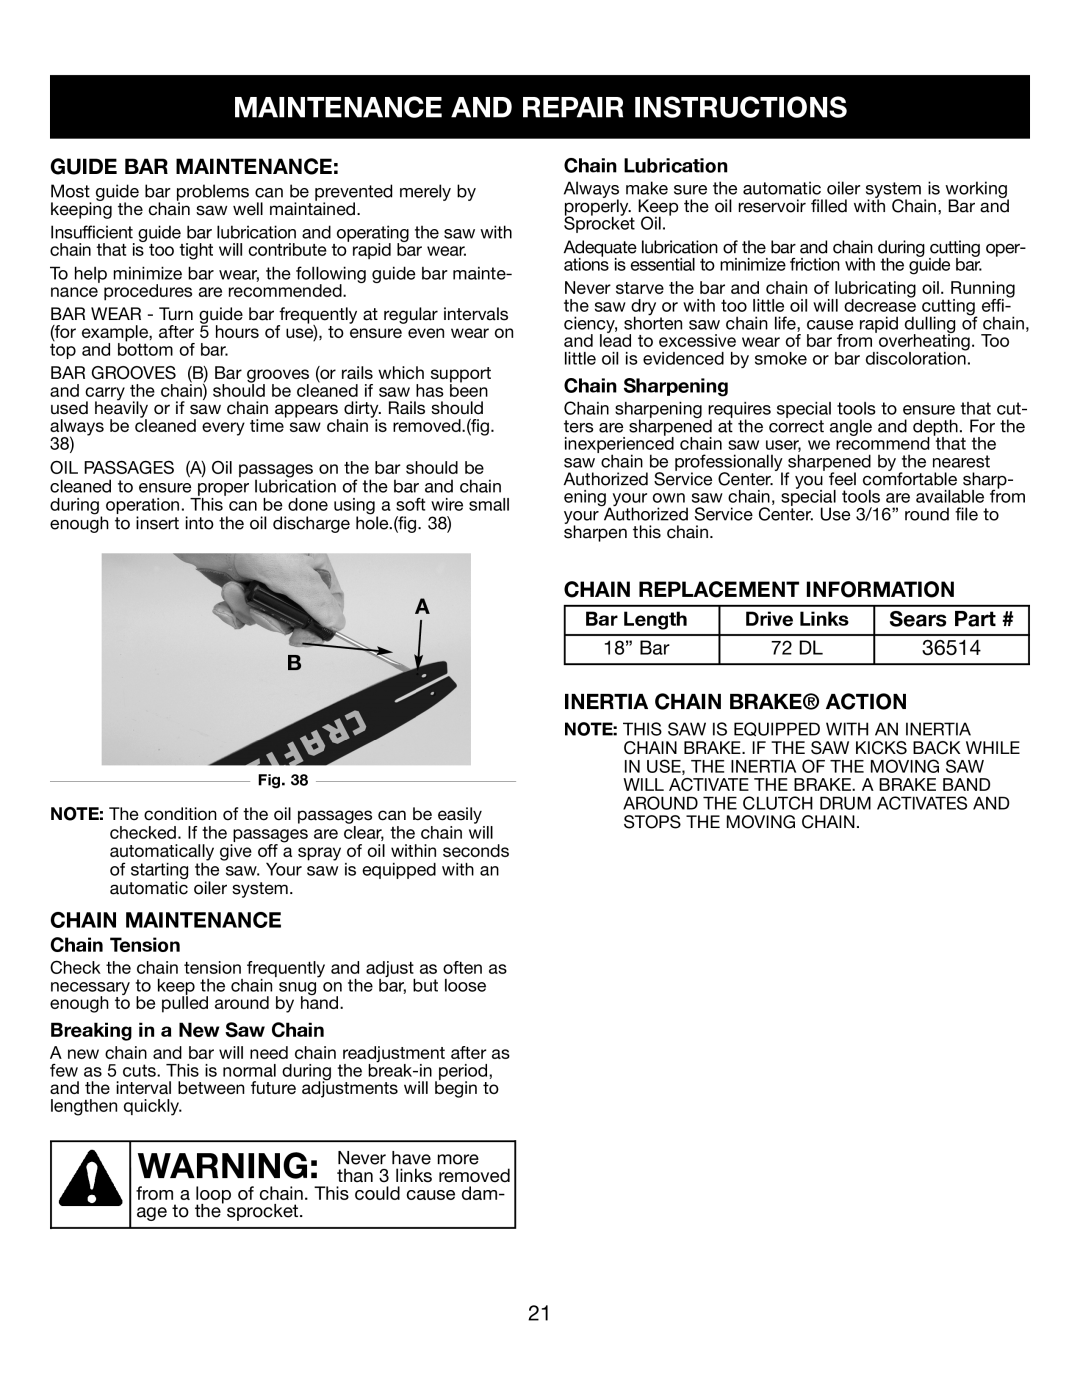 Sears 316.35084 Maintenance And Repair Instructions, Guide Bar Maintenance, Chain Maintenance, Sears, Chain Lubrication 